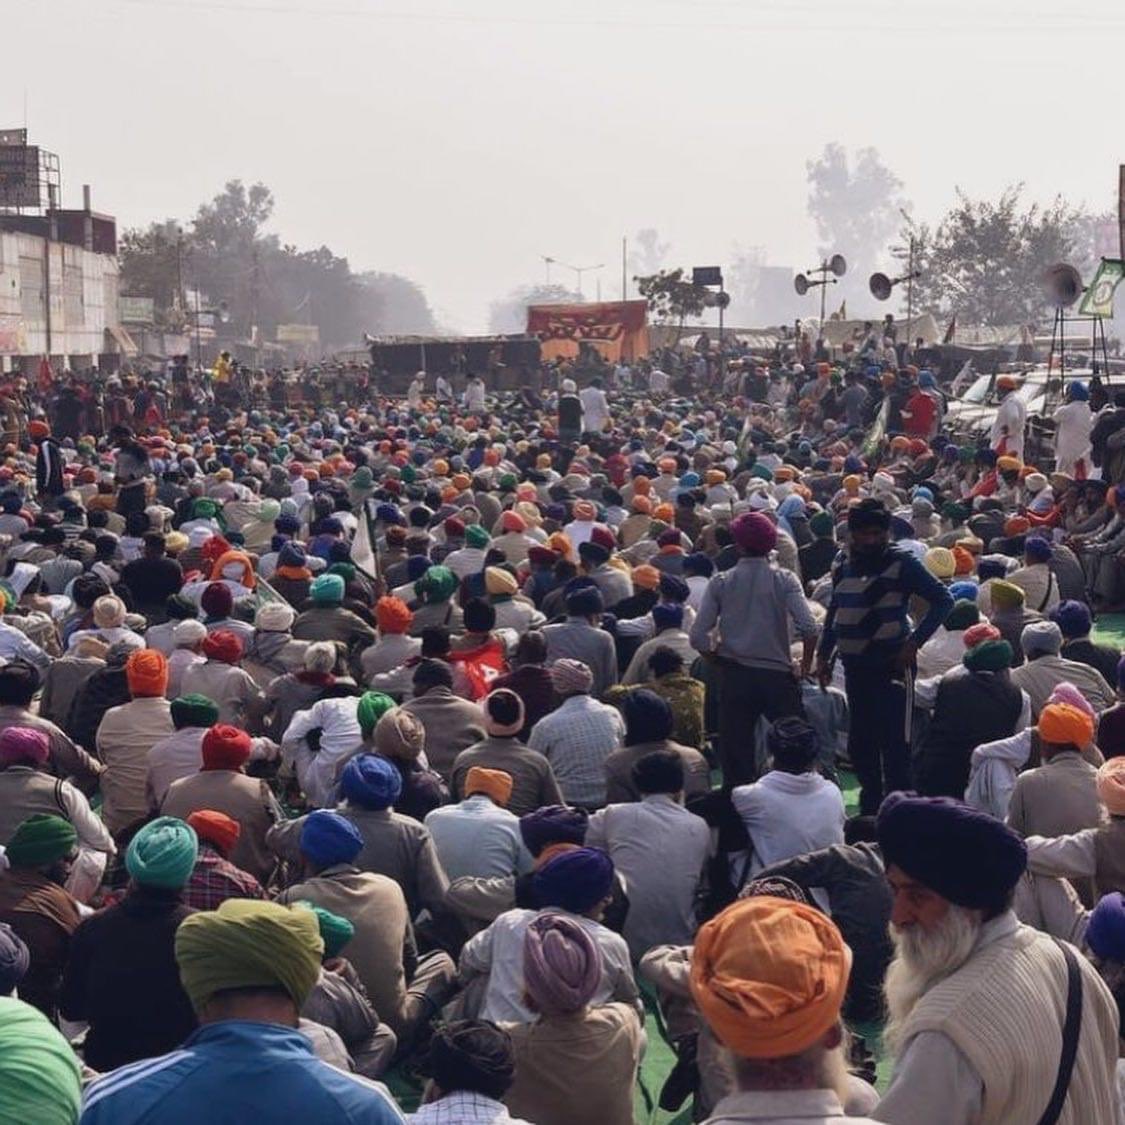 1- Dear followers: The largest protest in history is taking place right now in India. Since Nov 2020, protesters across states, religions, industries, communities and genders have been peacefully protesting in/around Delhi (the capital) against controversial farming bills.